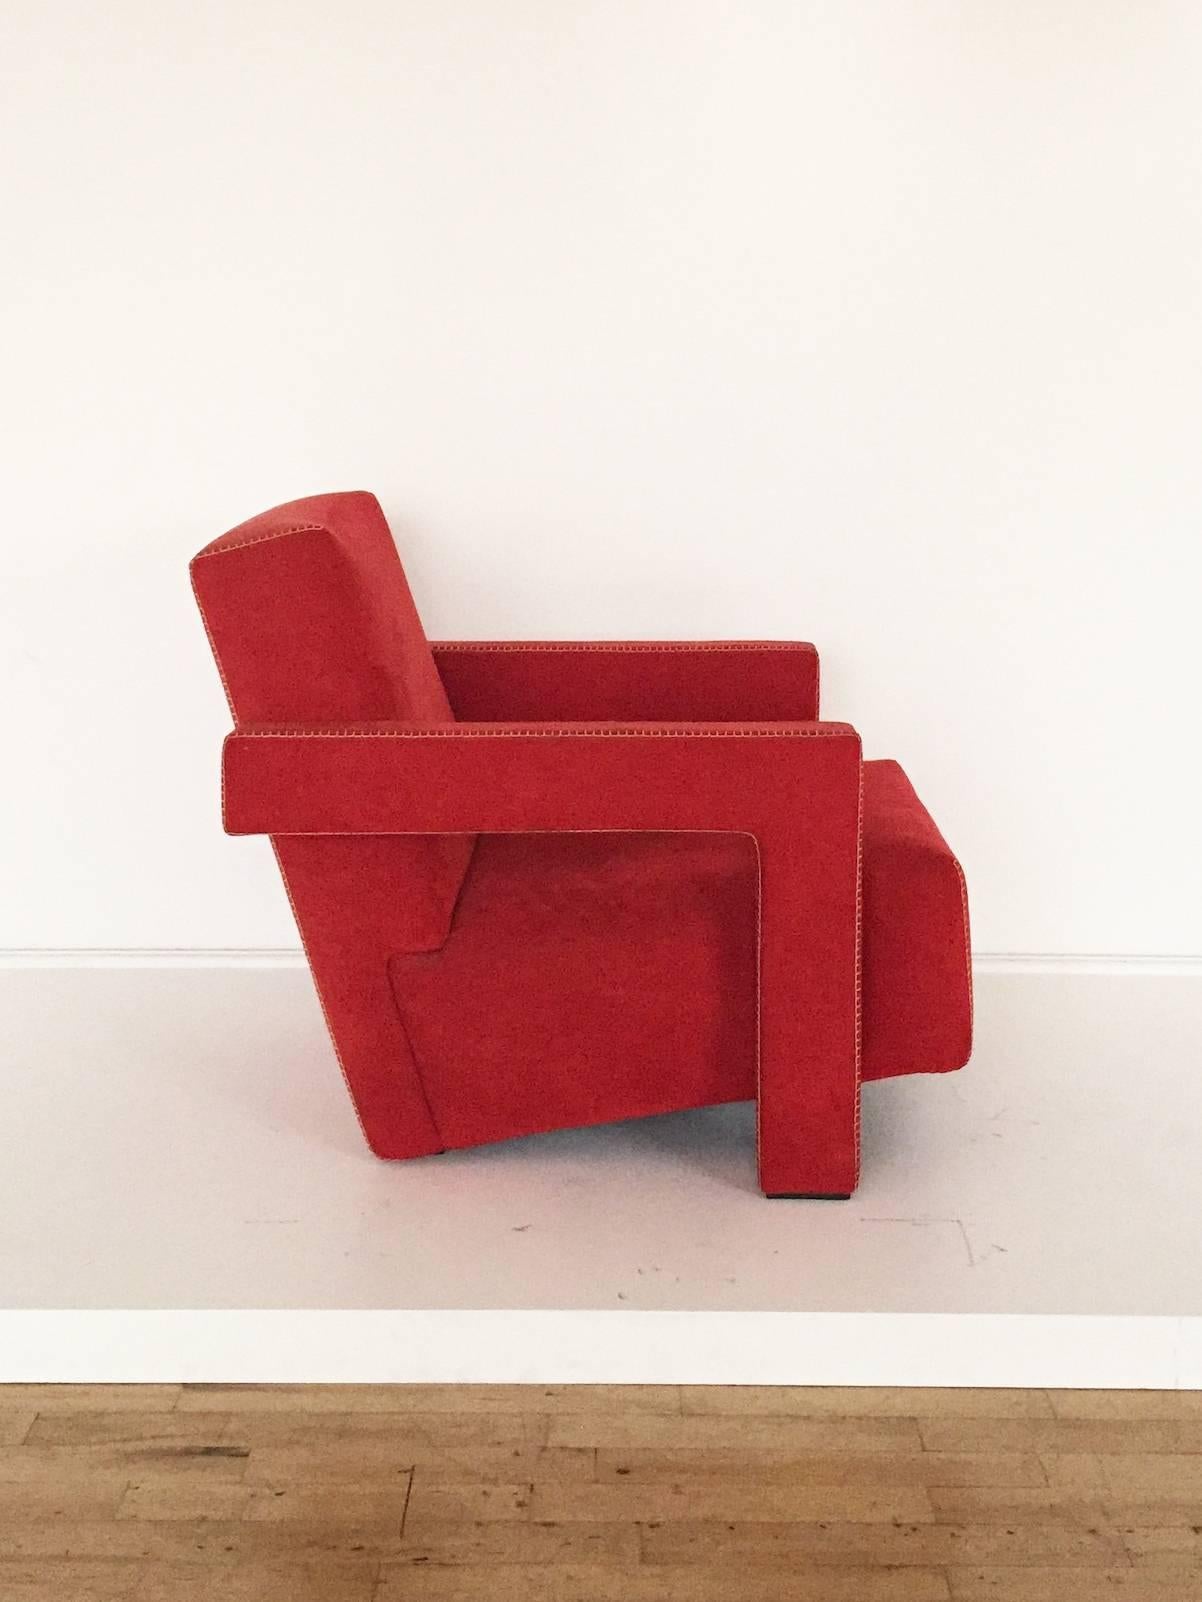 Early Cassina edition "Utrecht" chair by Gerrit Thomas Rietveld from circa 1988. In the original red suede upholstery with beige topstitching. Underside with numbered Cassina label.

From Cassina's website: "Rietveld, Dutch